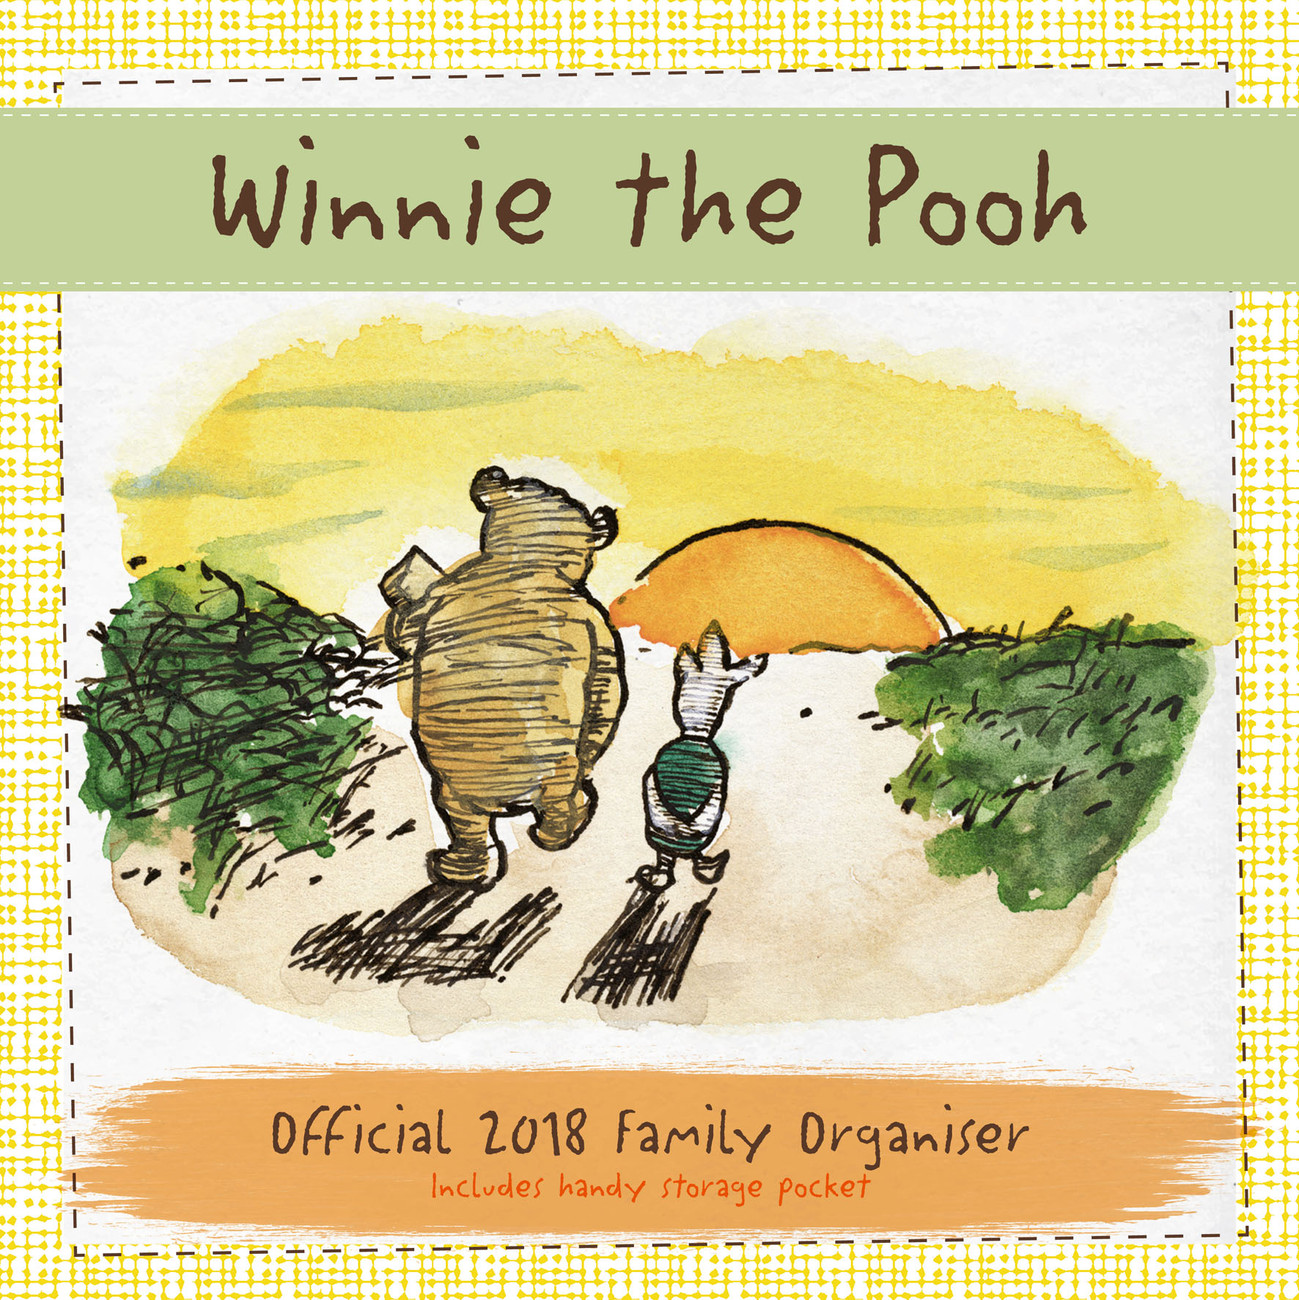 Winnie The Pooh - Calendars 2021 on UKposters/EuroPosters